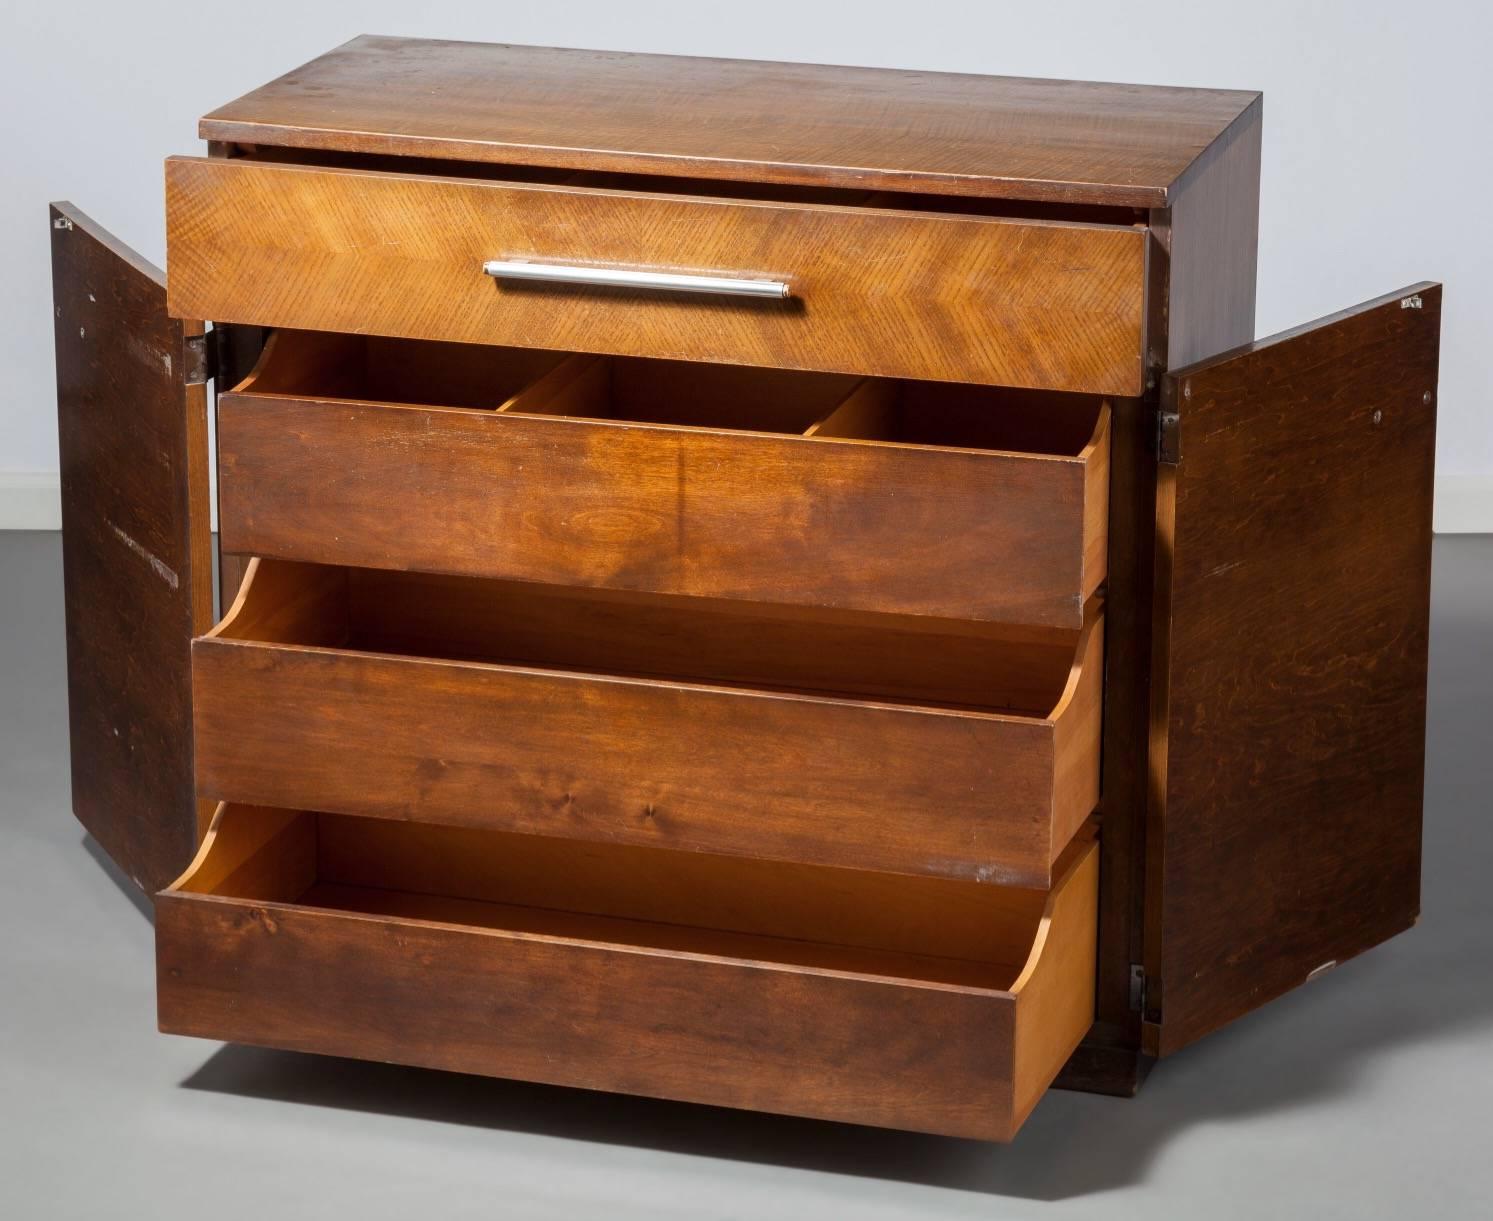 Gilbert Rohde (American, 1894-1944).
Dresser, 1933, design for living by Herman Miller Furniture Company, Zeeland, Michigan.
Mahogany and American ash veneer, brushed steel.
38 x 40 x 19 inches (96.5 x 101.6 x 48.3 cm).

From the estate of